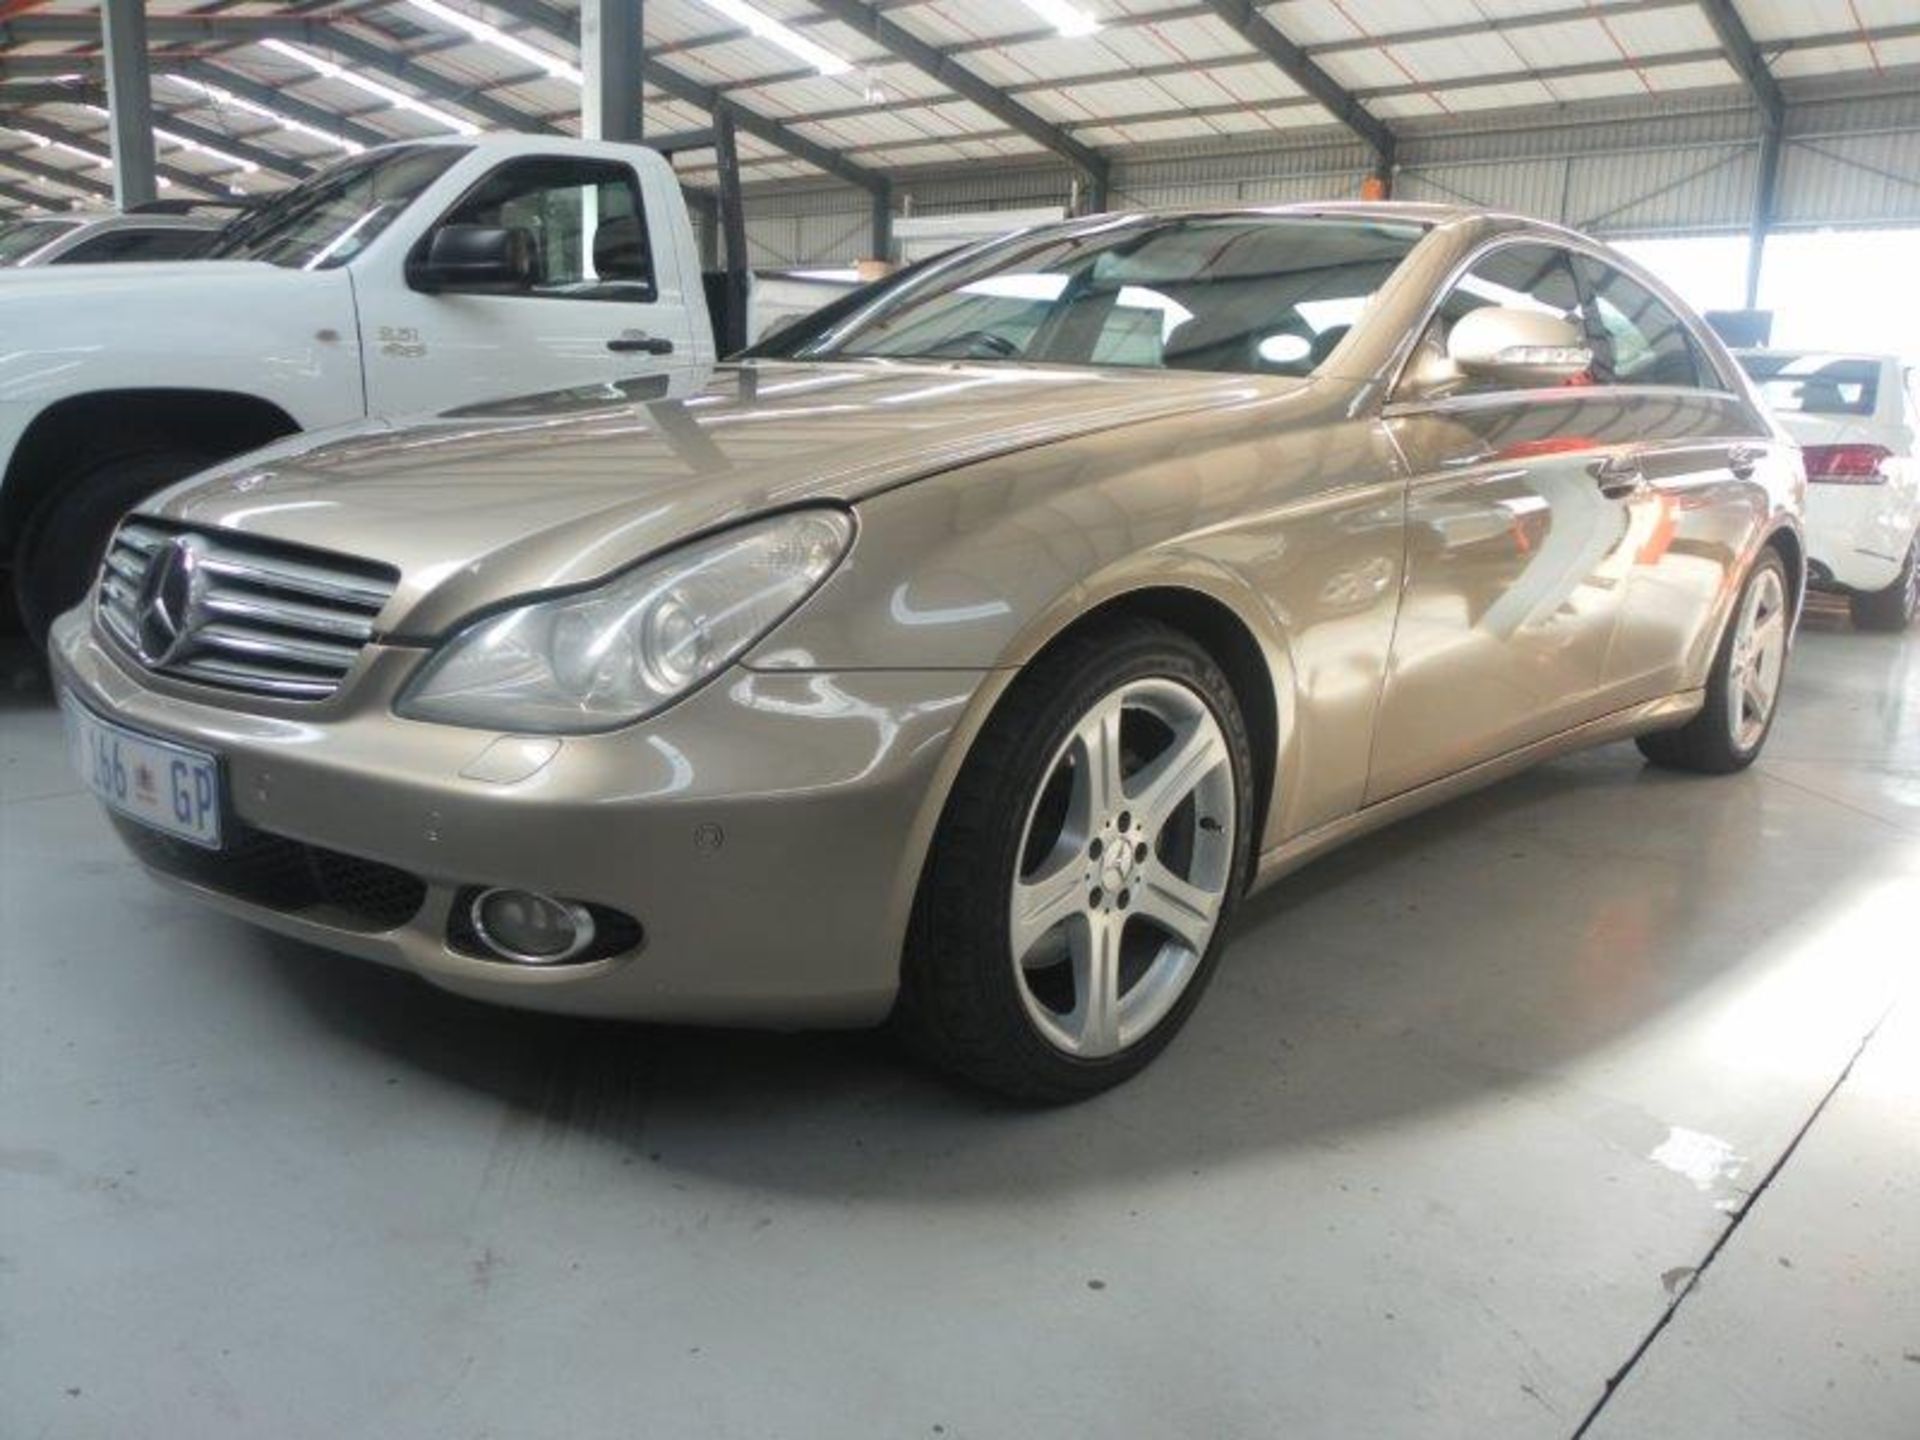 2008 XPY166GP Mercedes-Benz Cls350 Auto (Vin No: WDD2193562A135151 )(219140 kms) - Image 5 of 5